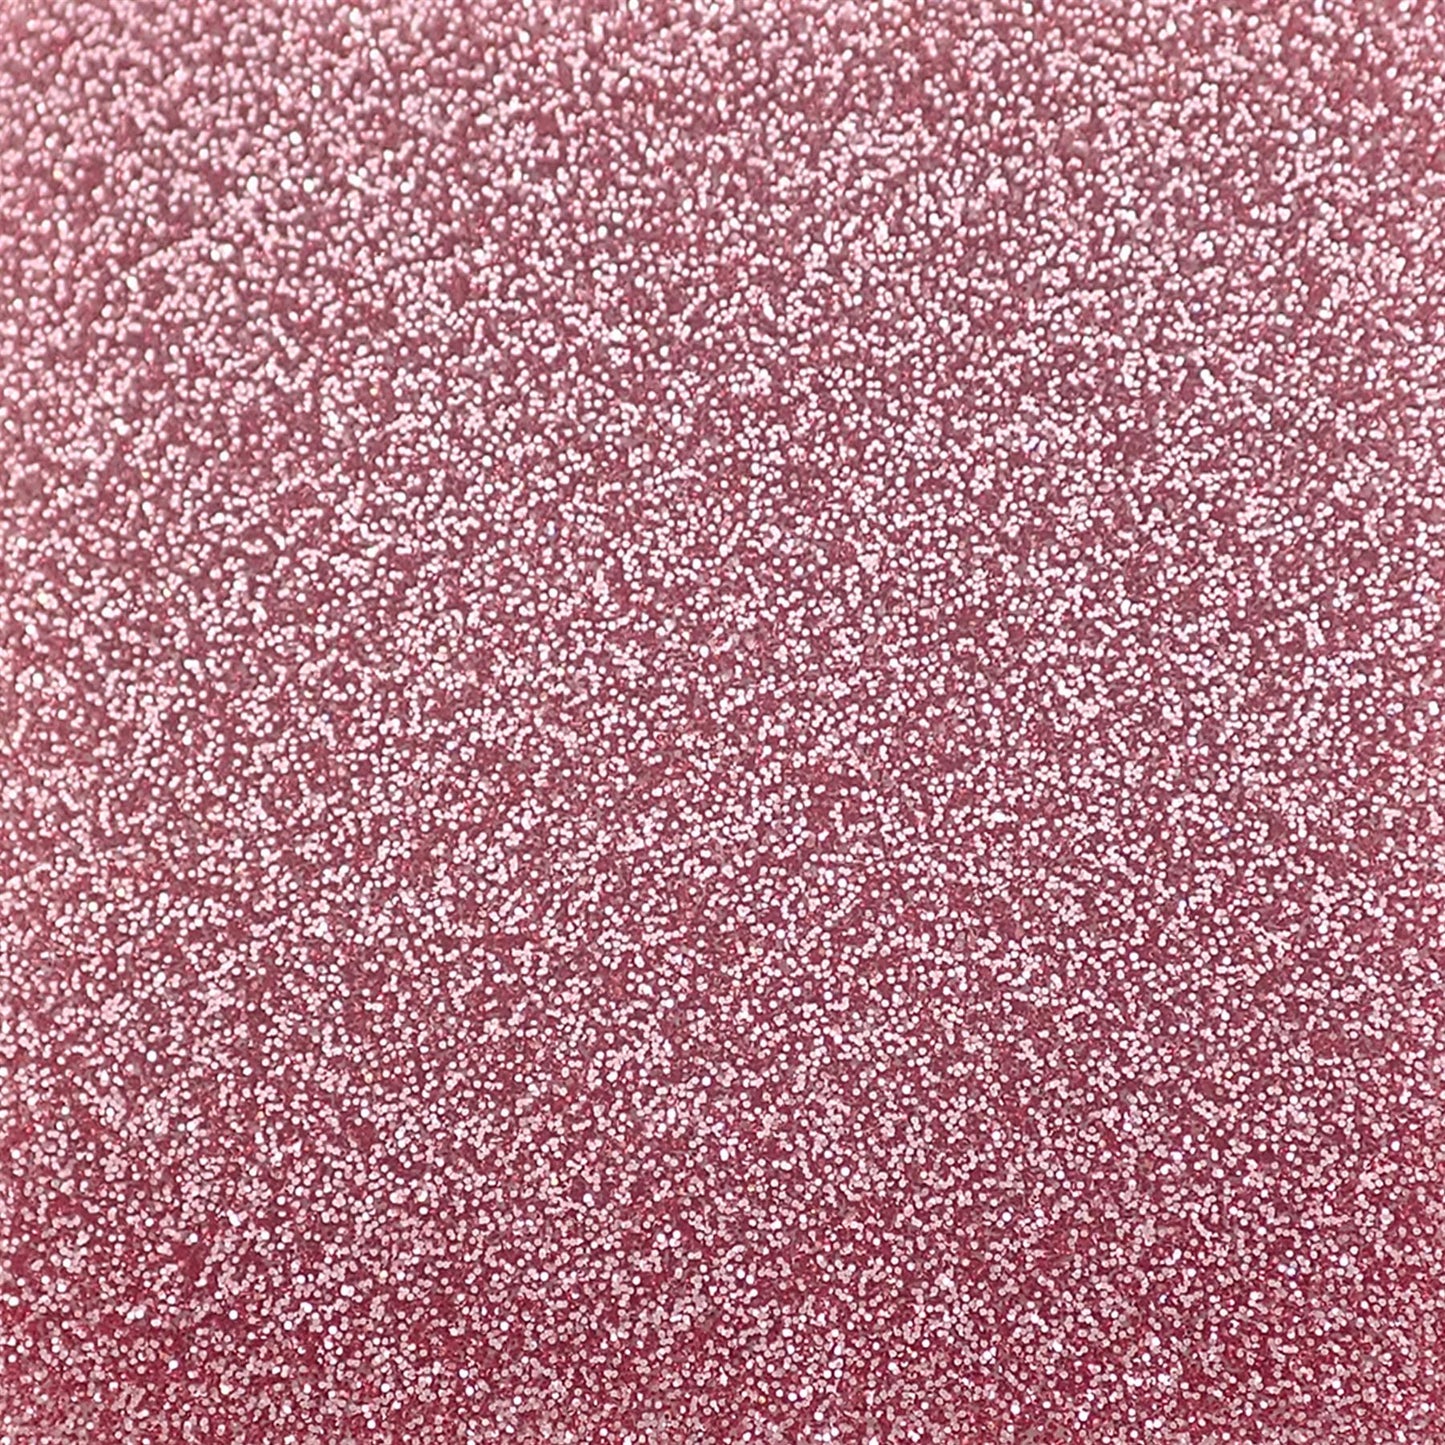 Incudo Pink Gold 2-Sided Glitter Acrylic Sheet - Sample